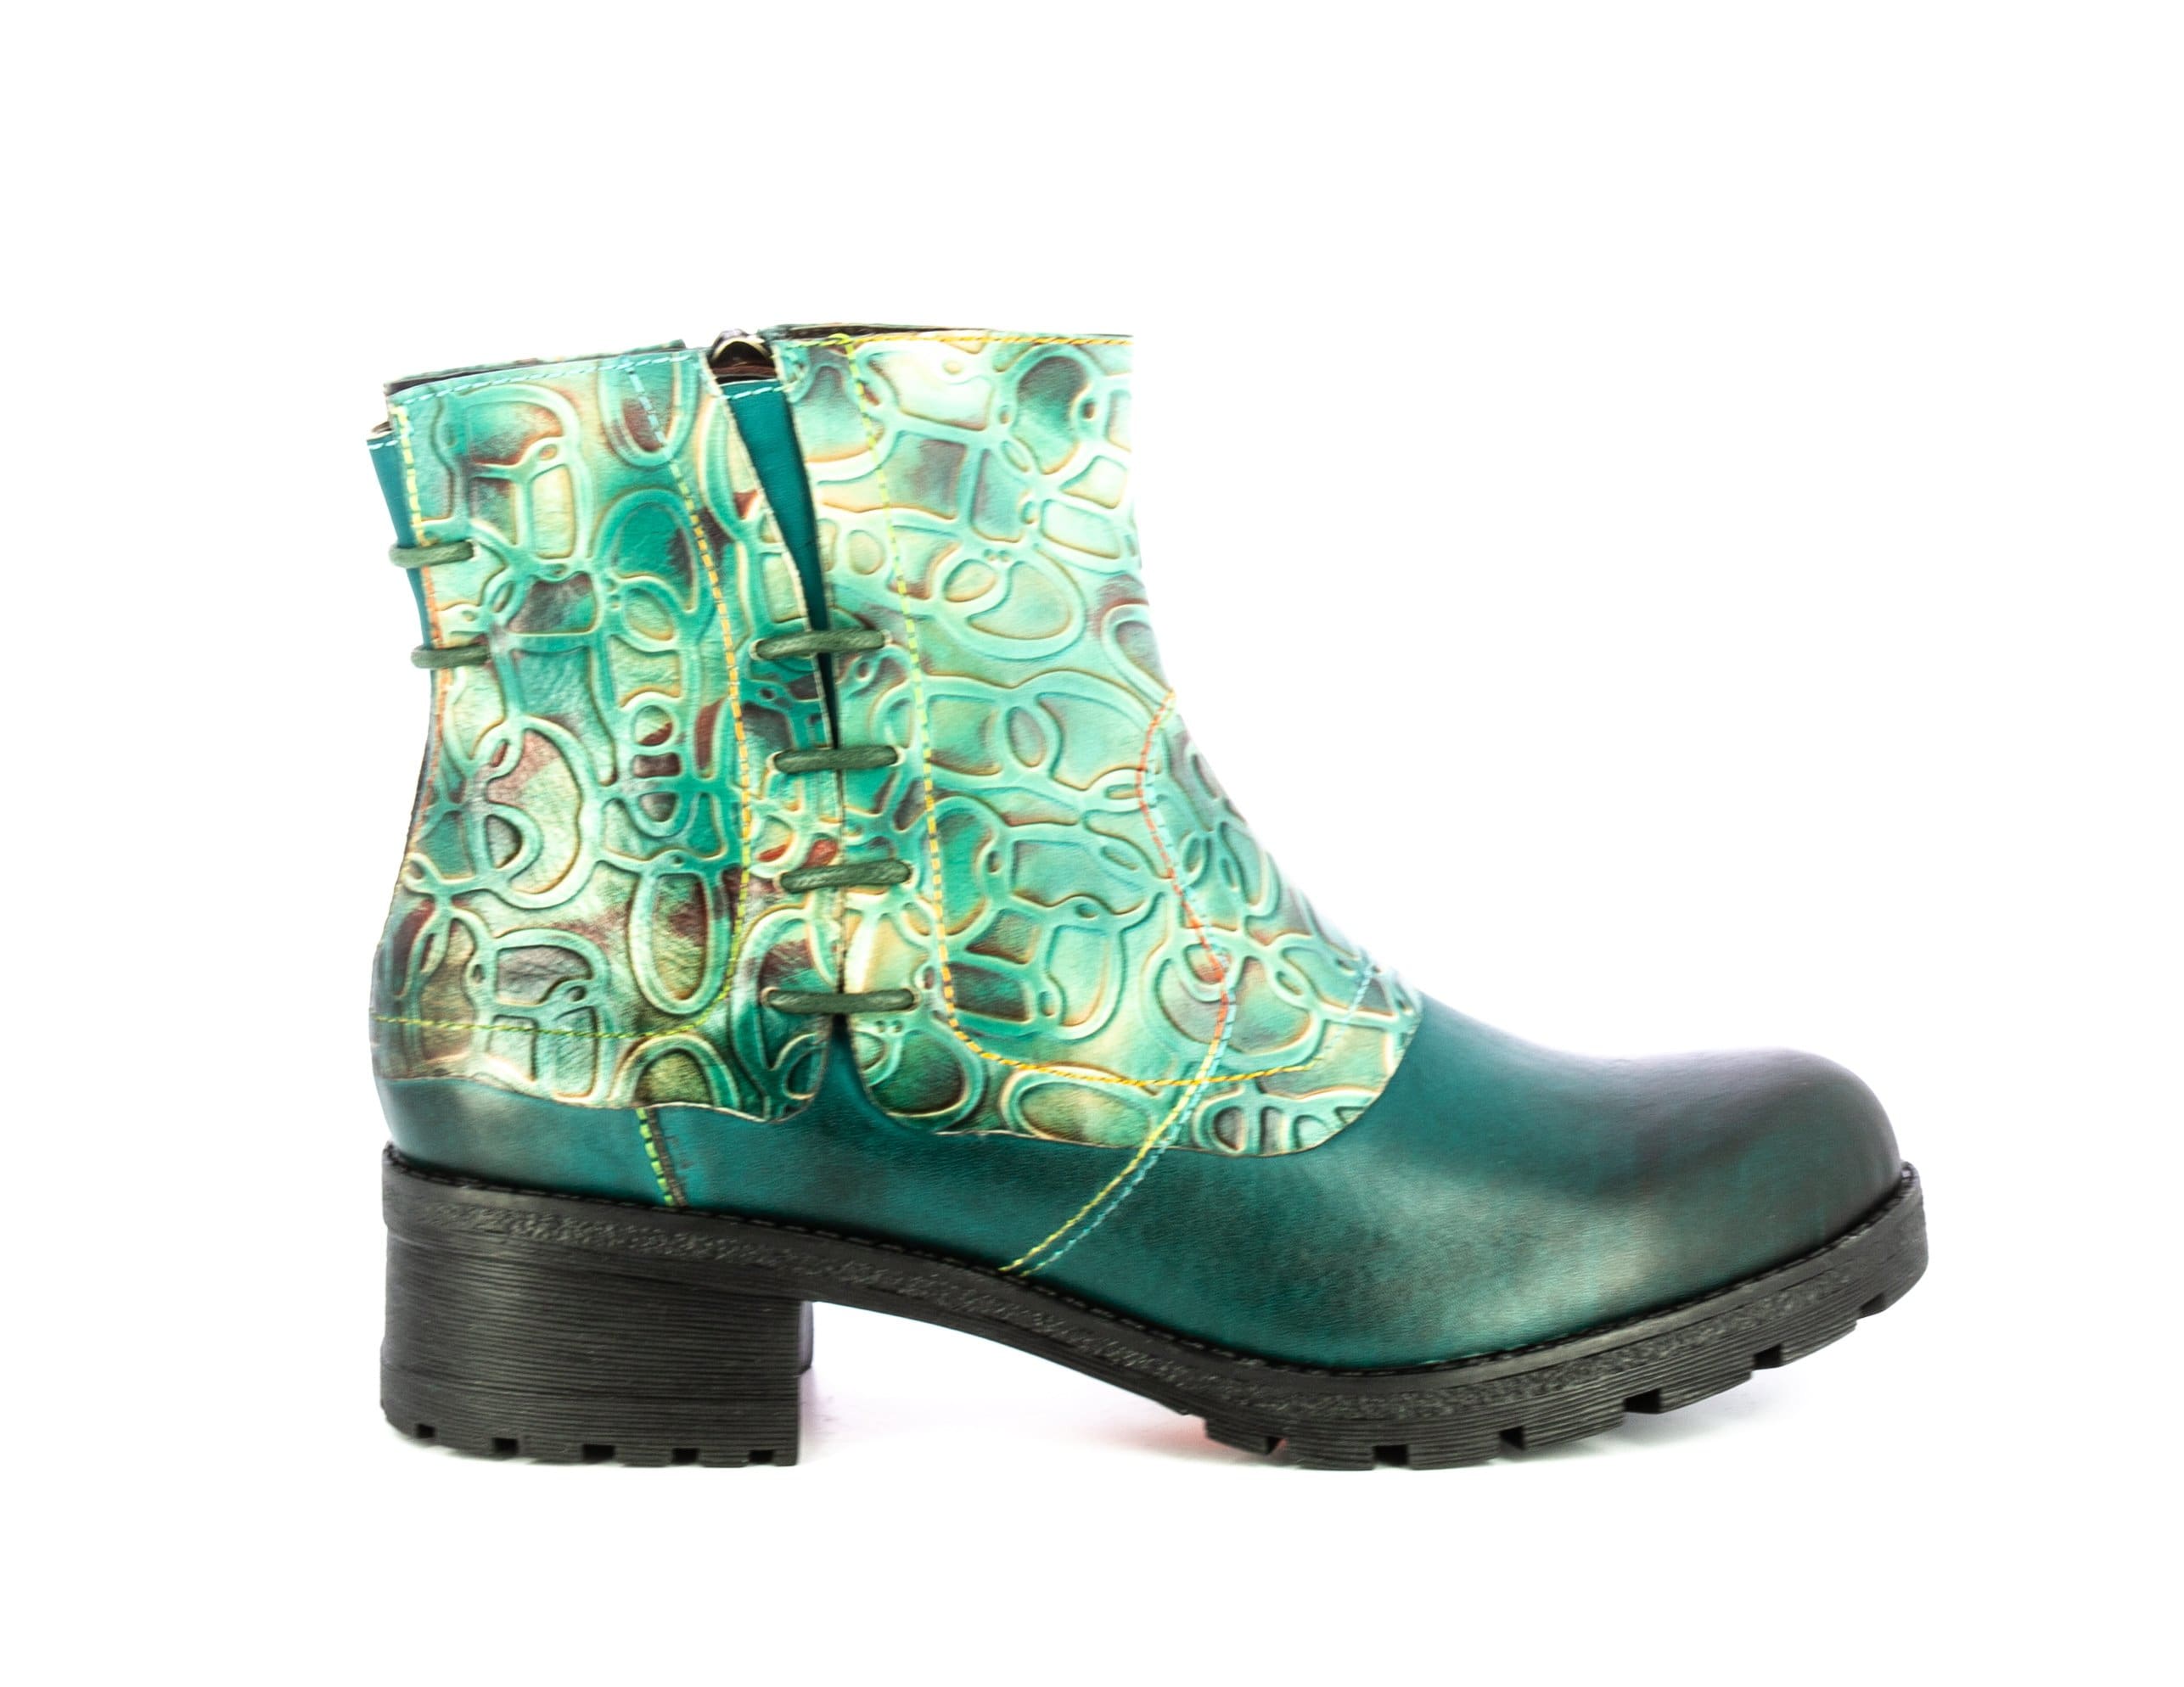 Chaussure COCRAILO 11 - 35 / Turquoise - Boots